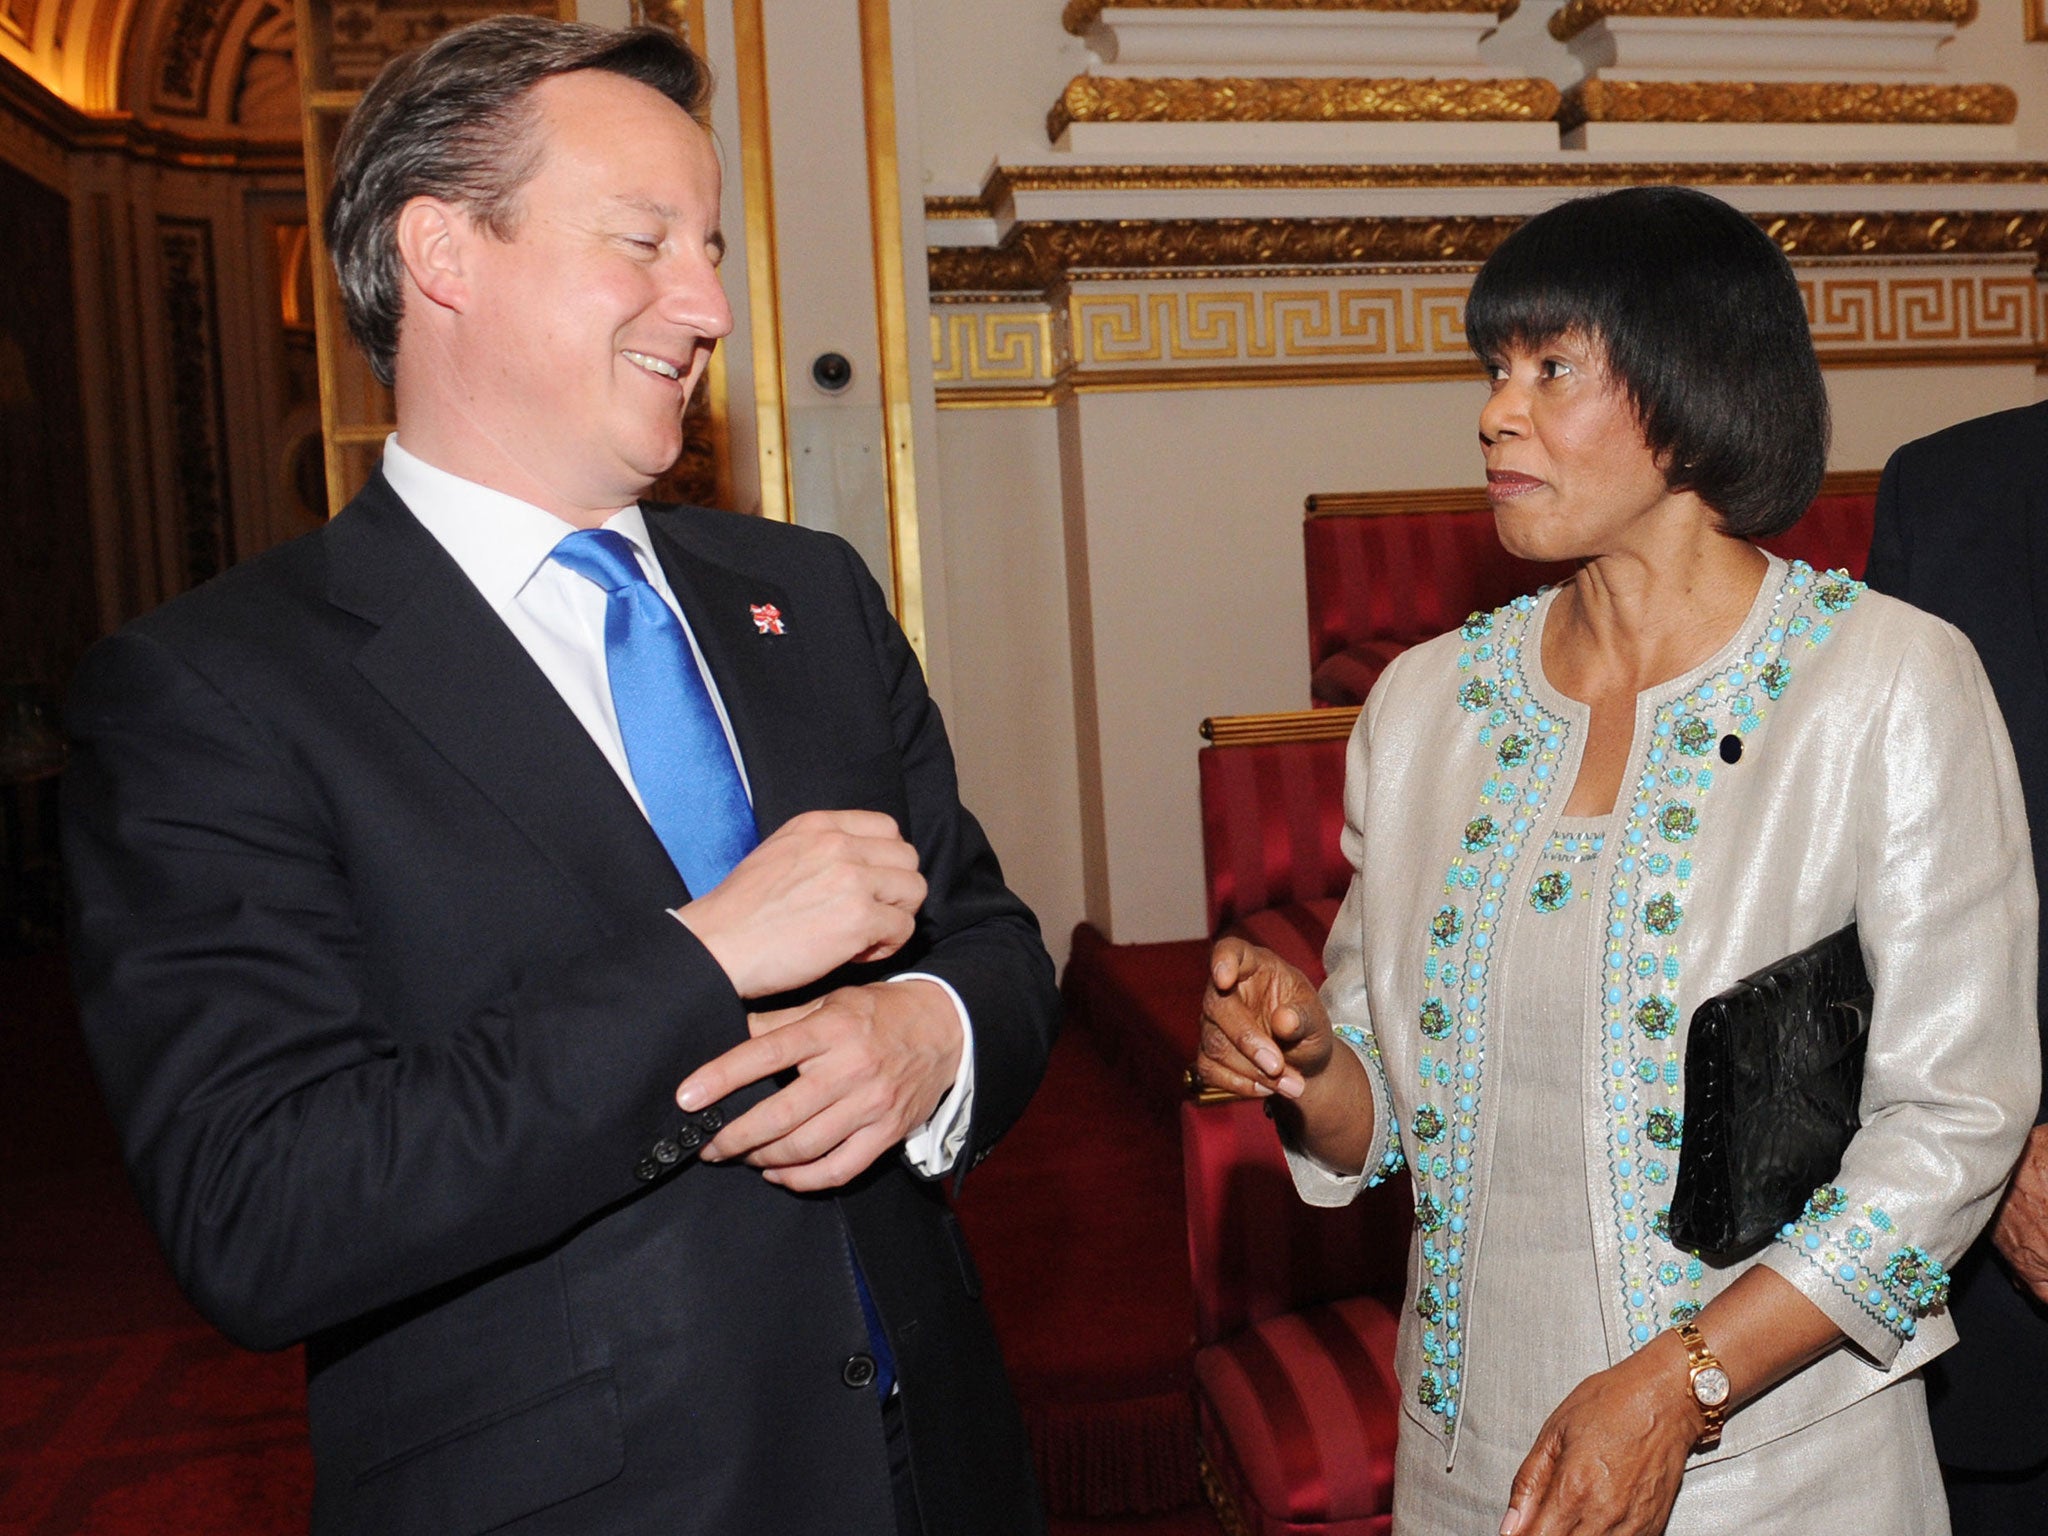 David Cameron (L) meets with Prime Minister of Jamaica Portia Simpson Miller at Buckingham Palace in 2012